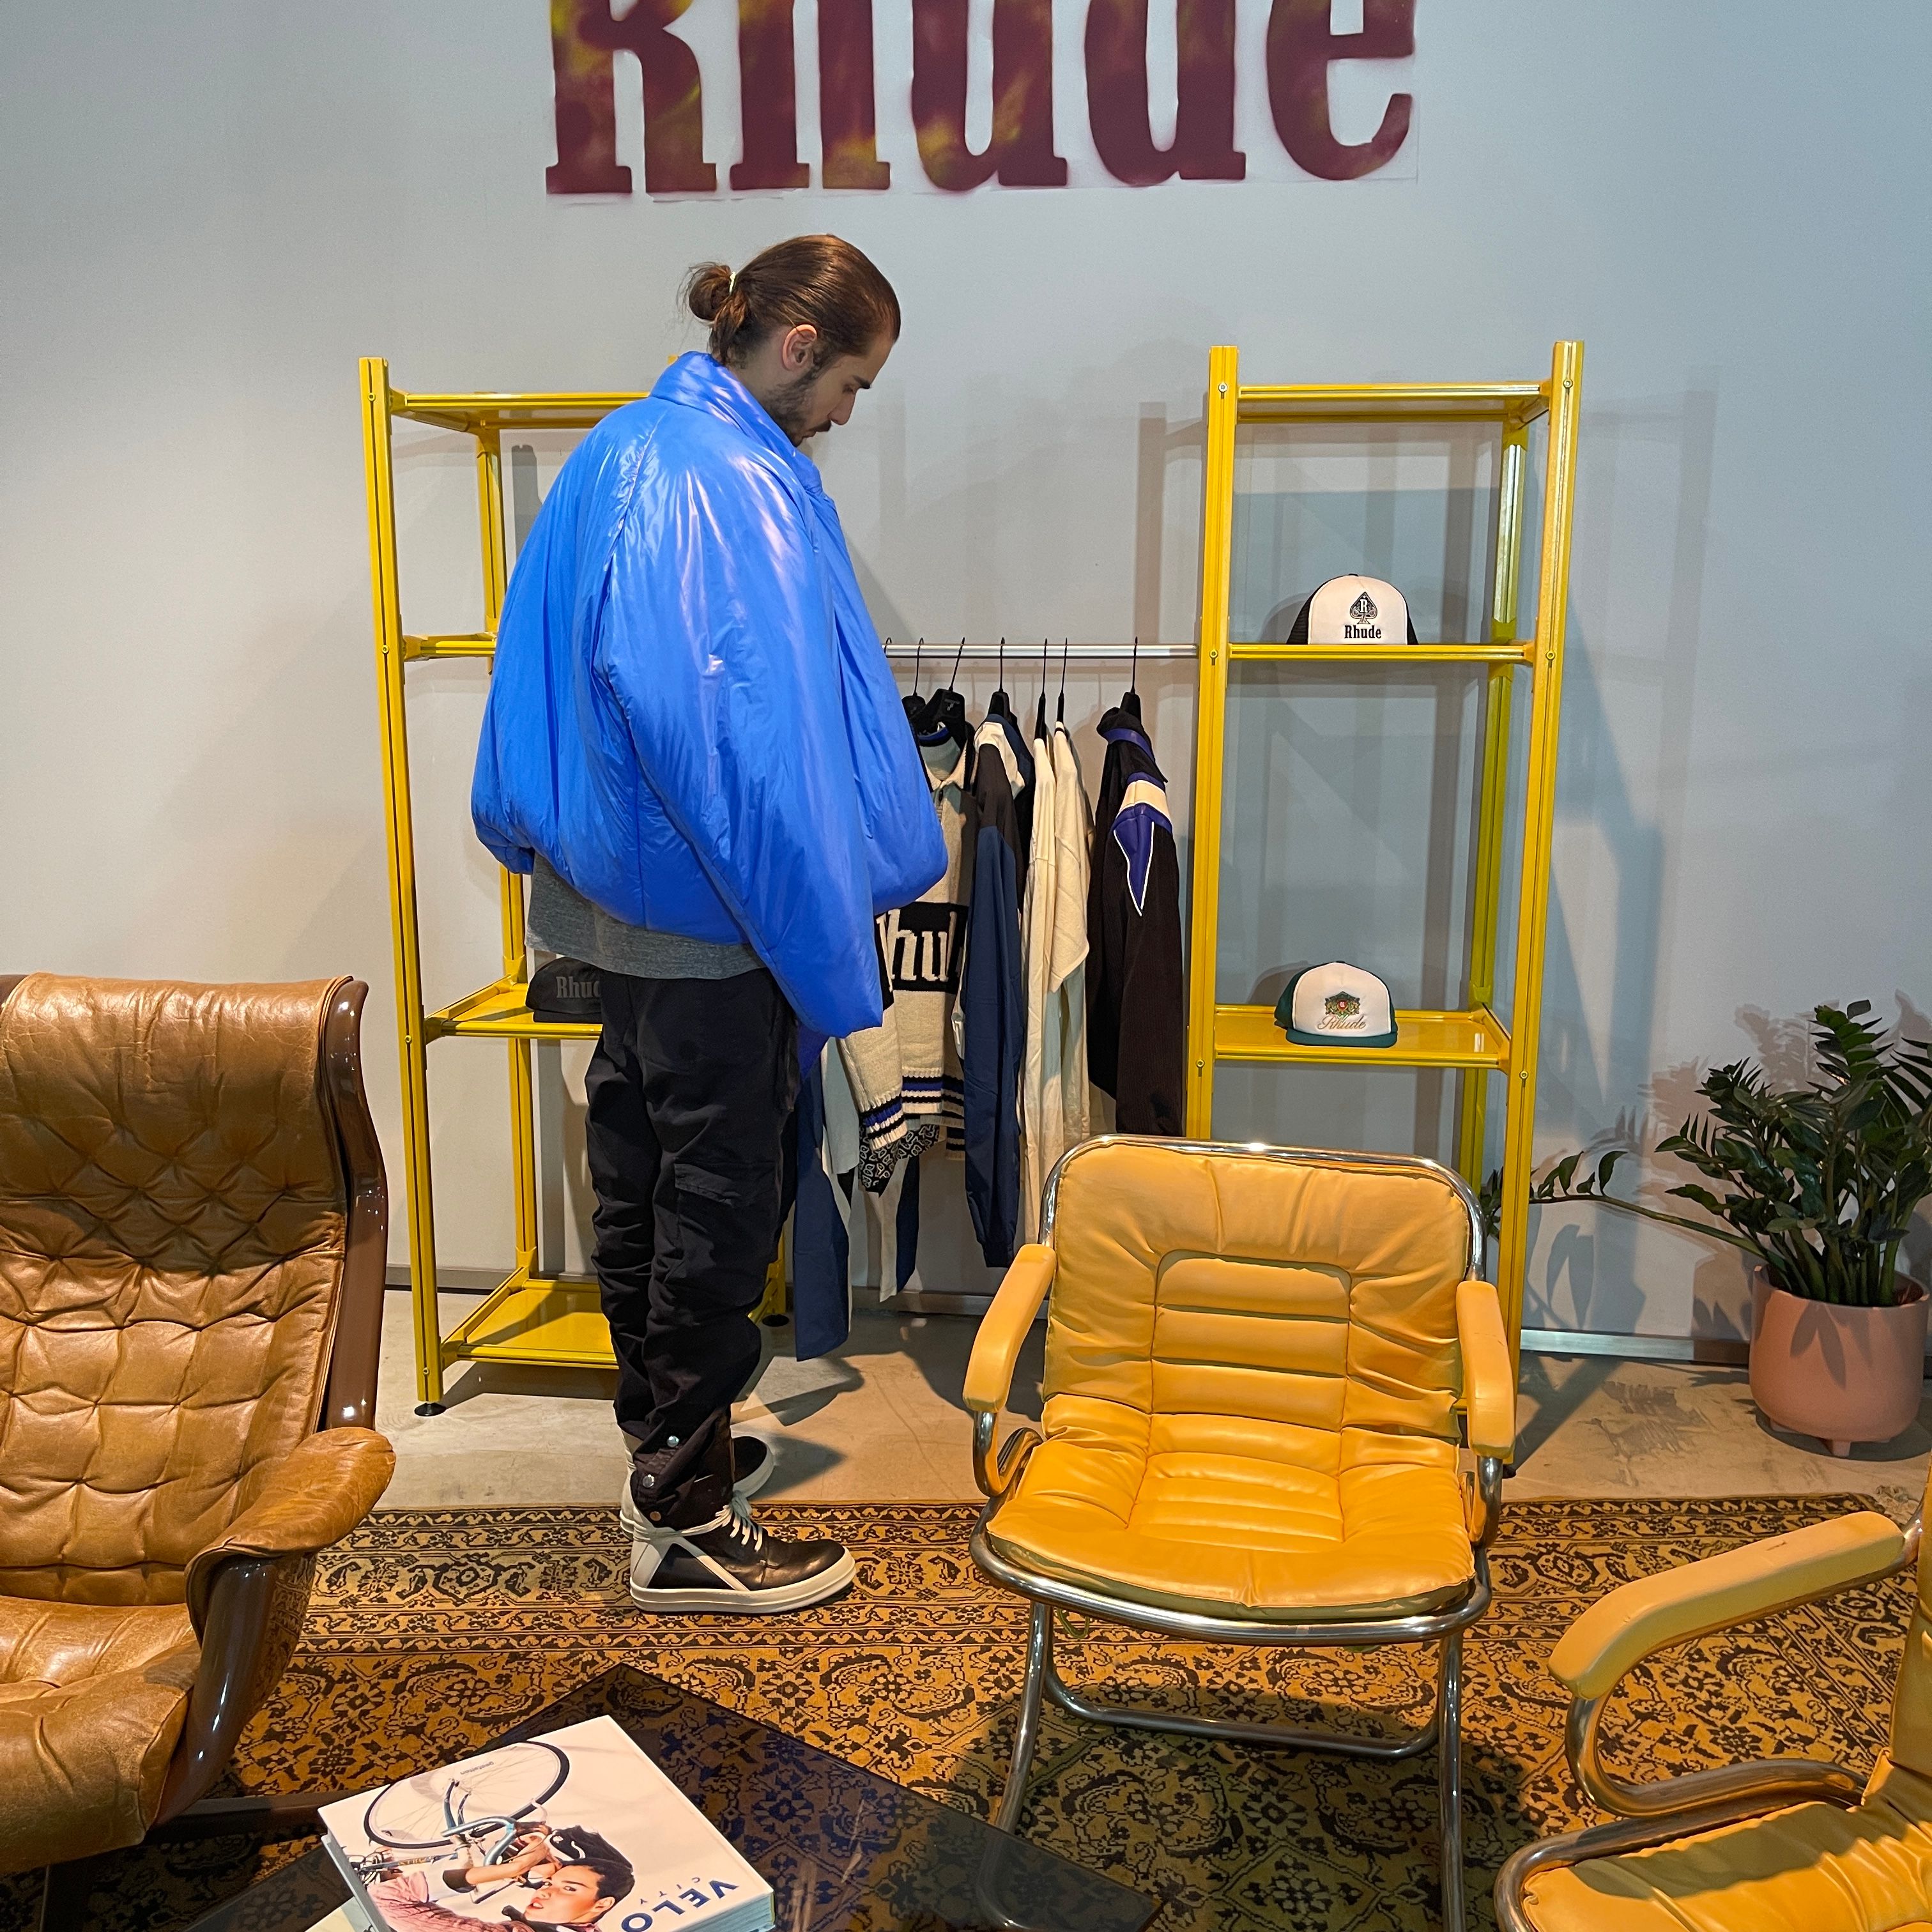 Rhude event Wrong Weather Store